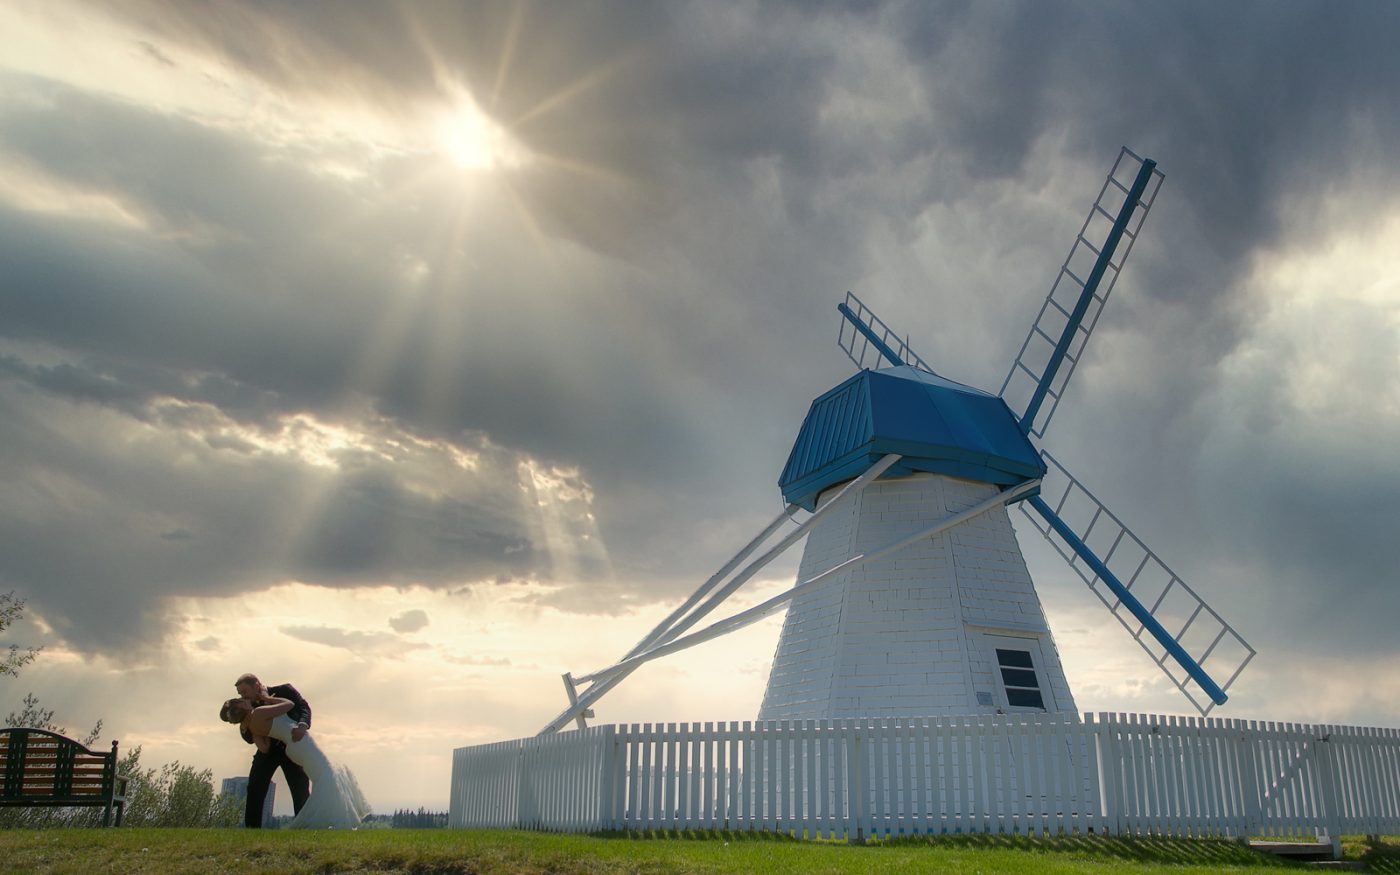 Keith dipping Joelle under a cloudy sky beside a windmill